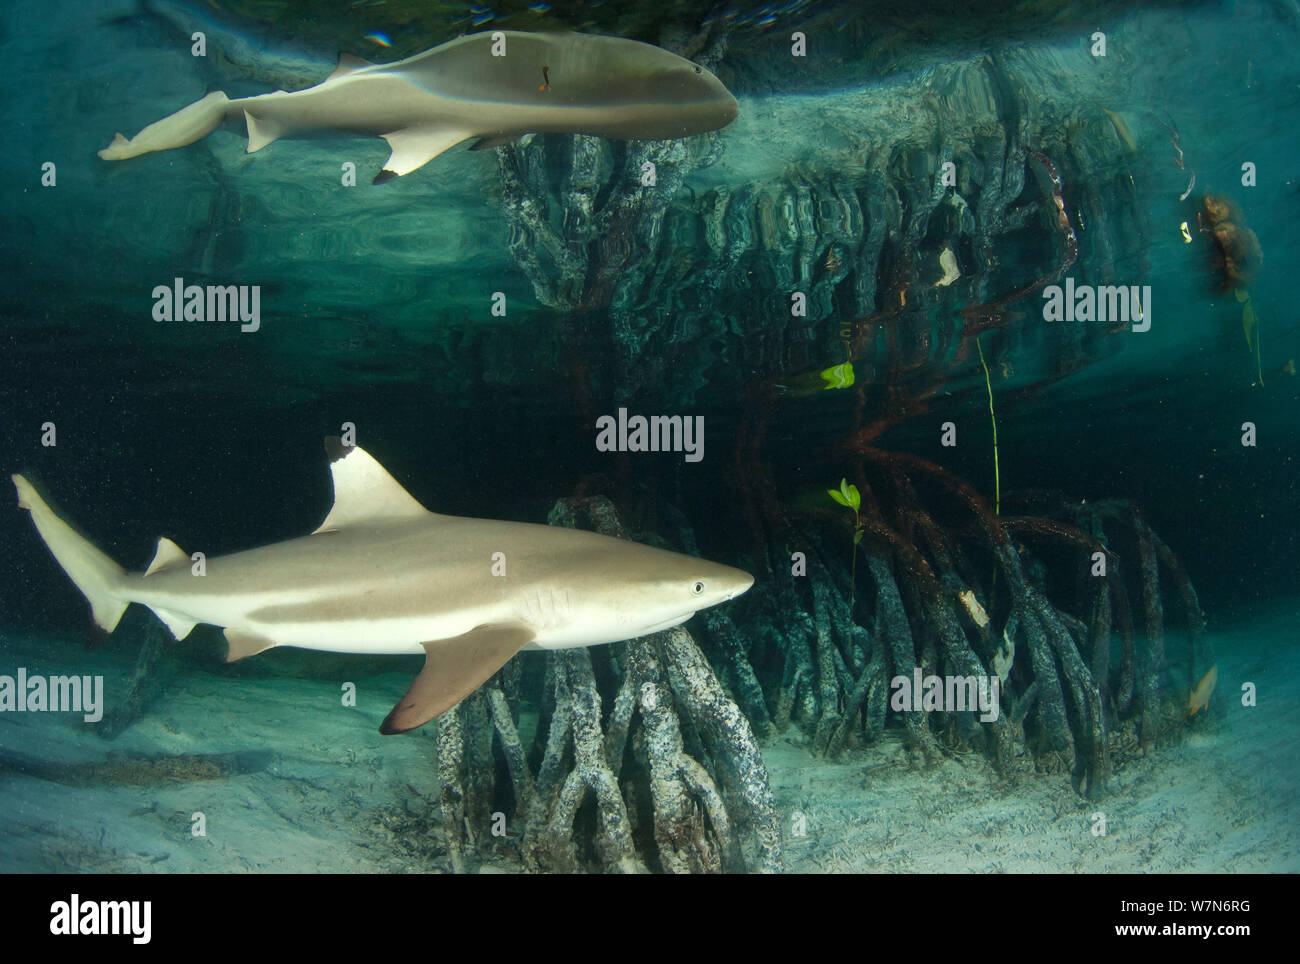 Blacktip reef shark (Carcharhinus melanopterus) swimming in mangrove forest, reflections above, Aldabra Atoll, Seychelles, Indian Ocean Stock Photo